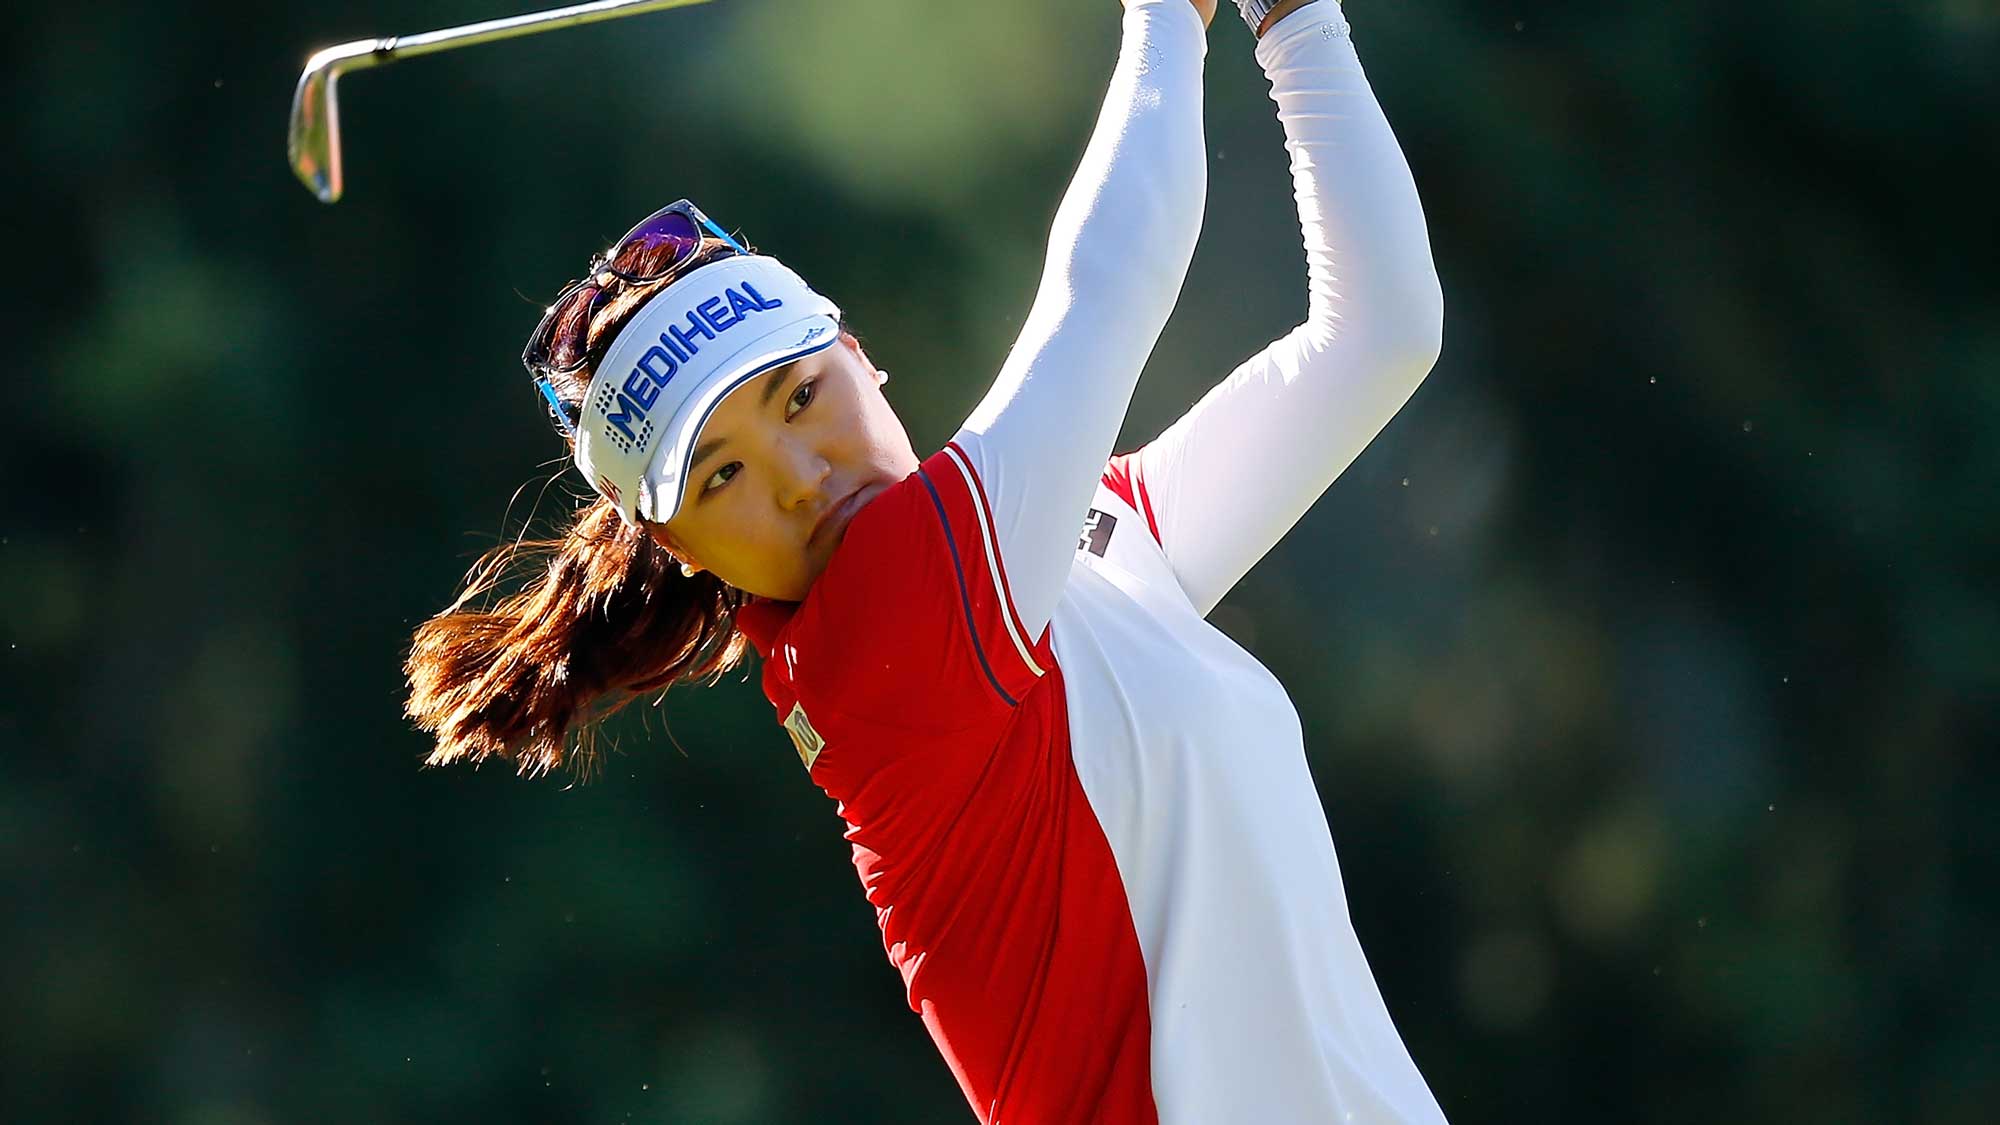 So Yeon Ryu of South Korea tees off on the 2nd hole during the second round of the LPGA Cambia Portland Classic